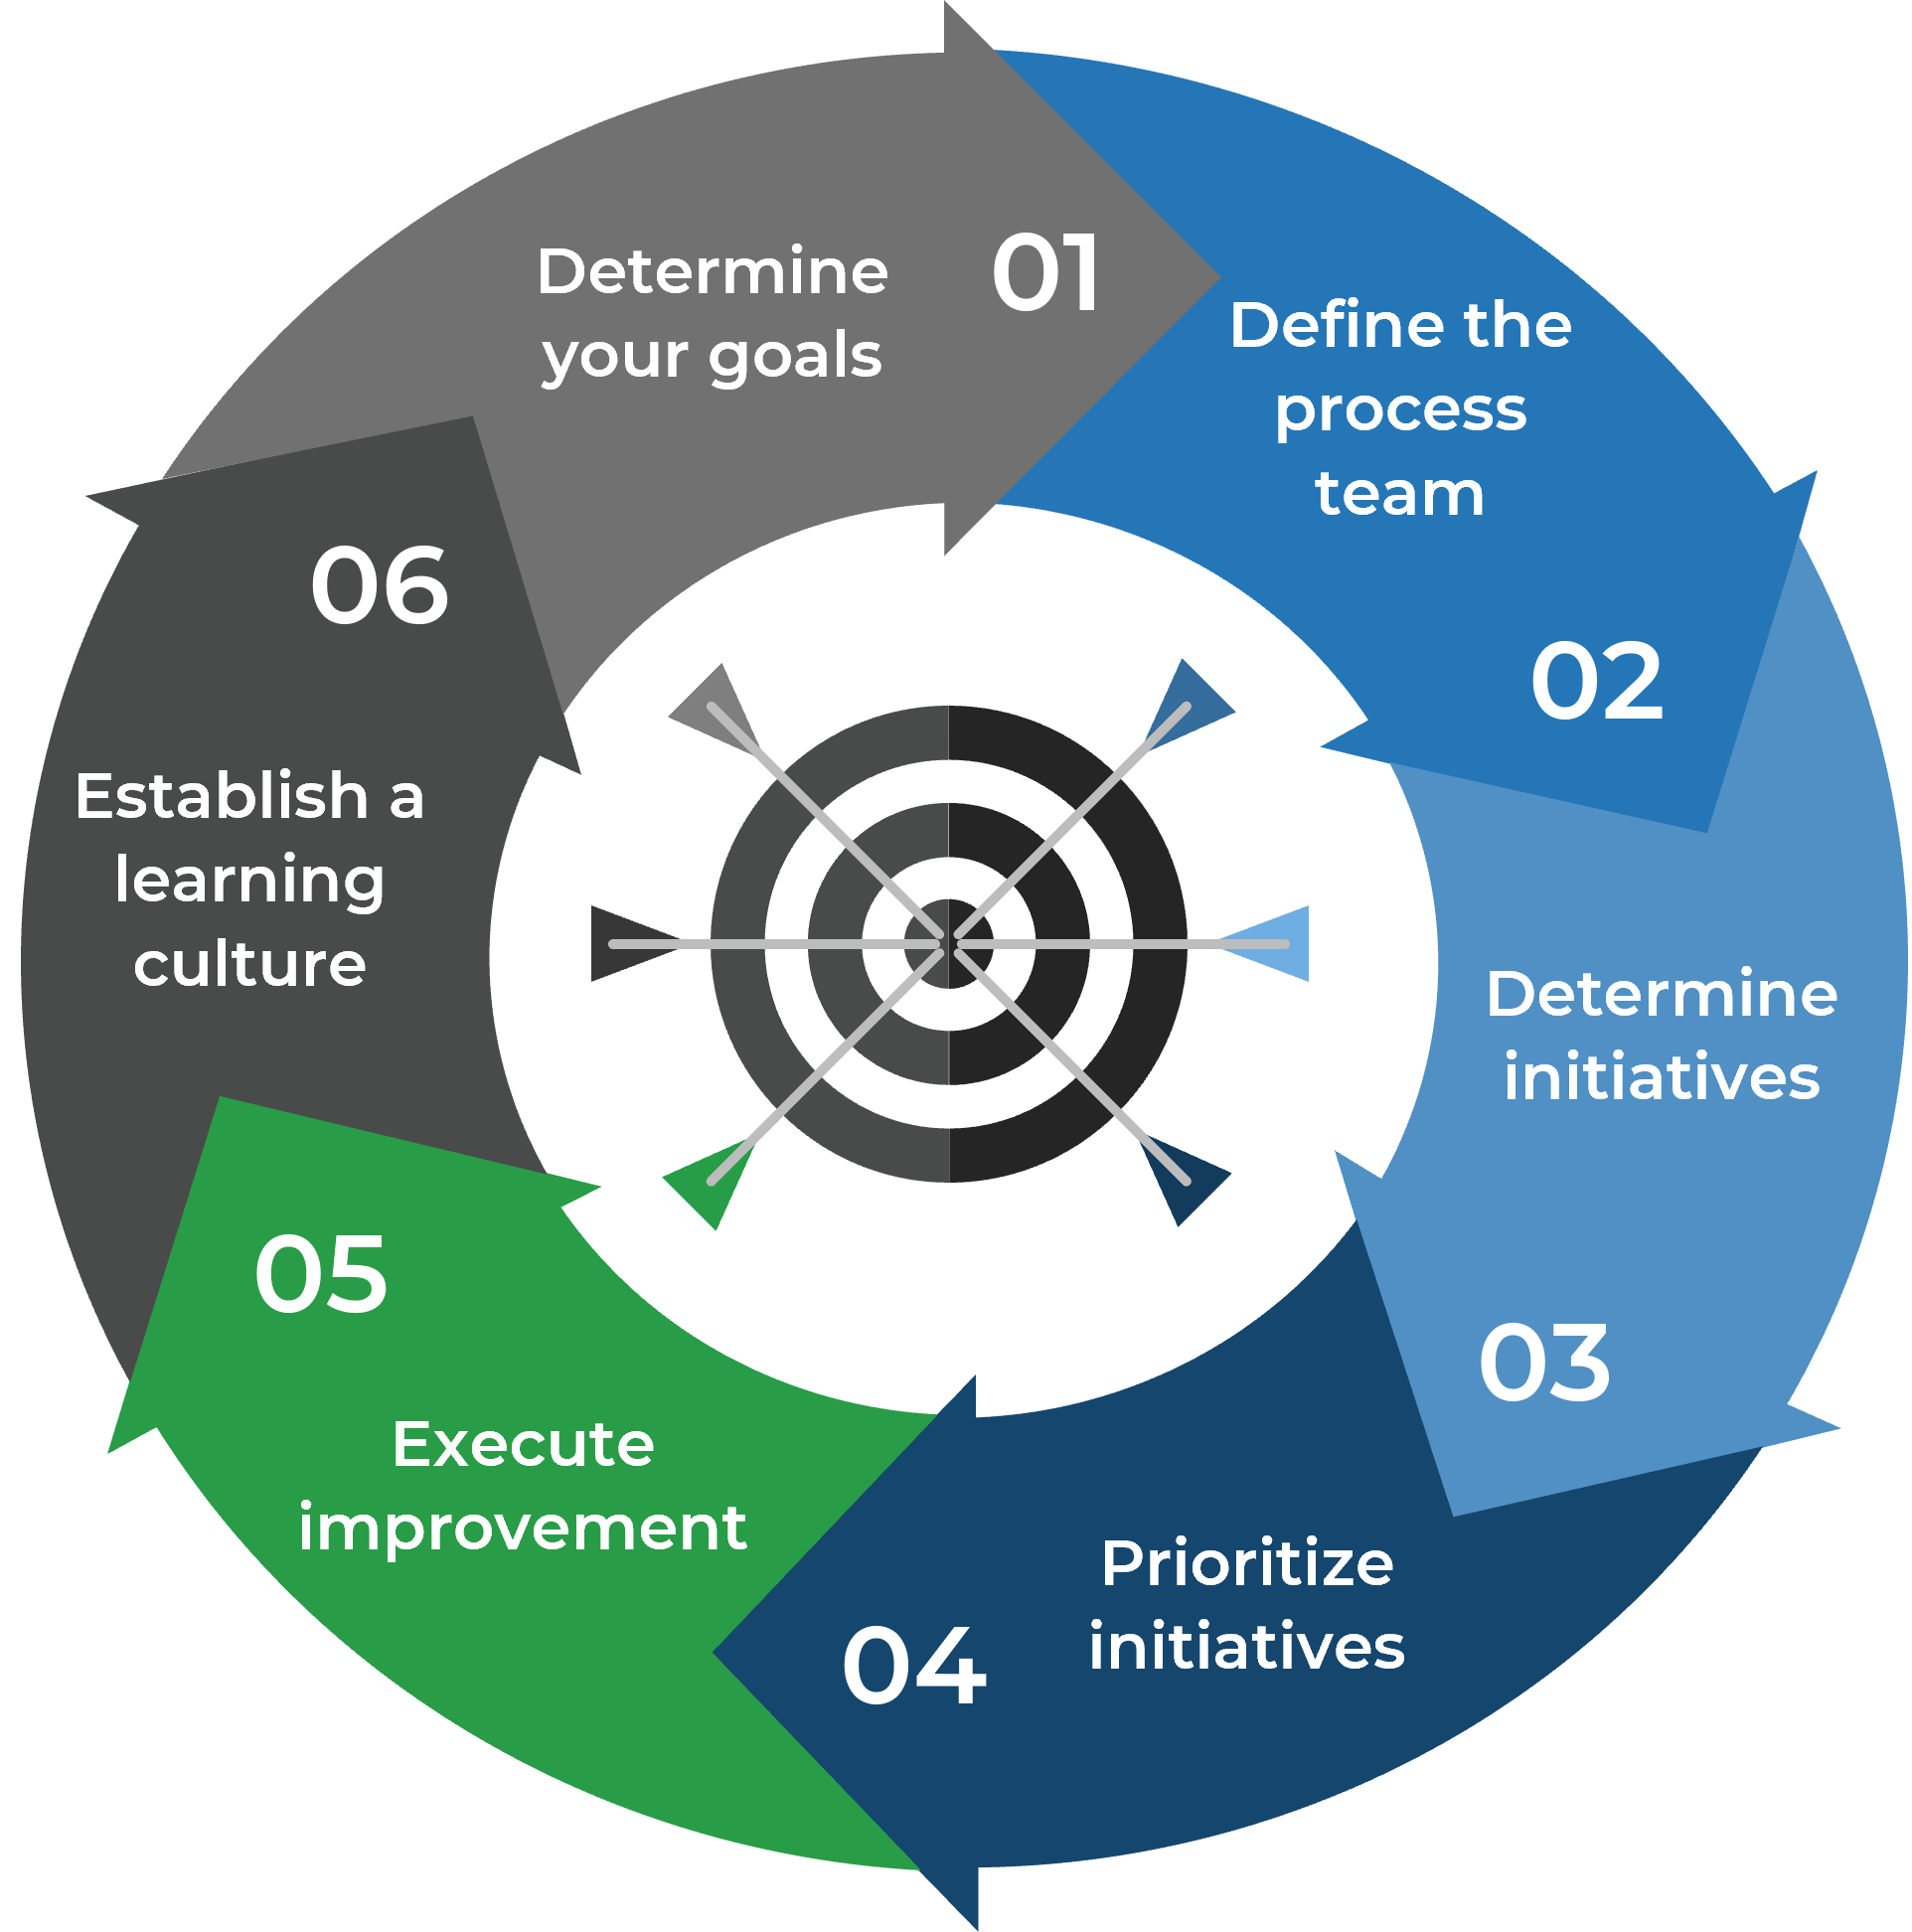 A cycle around a dartboard with numbered steps: '01 Determine your goals', '02 Define the process team', '03 Determine initiatives', '04 Prioritize initiatives', '05 Execute improvement', '06 Establish a learning culture'.